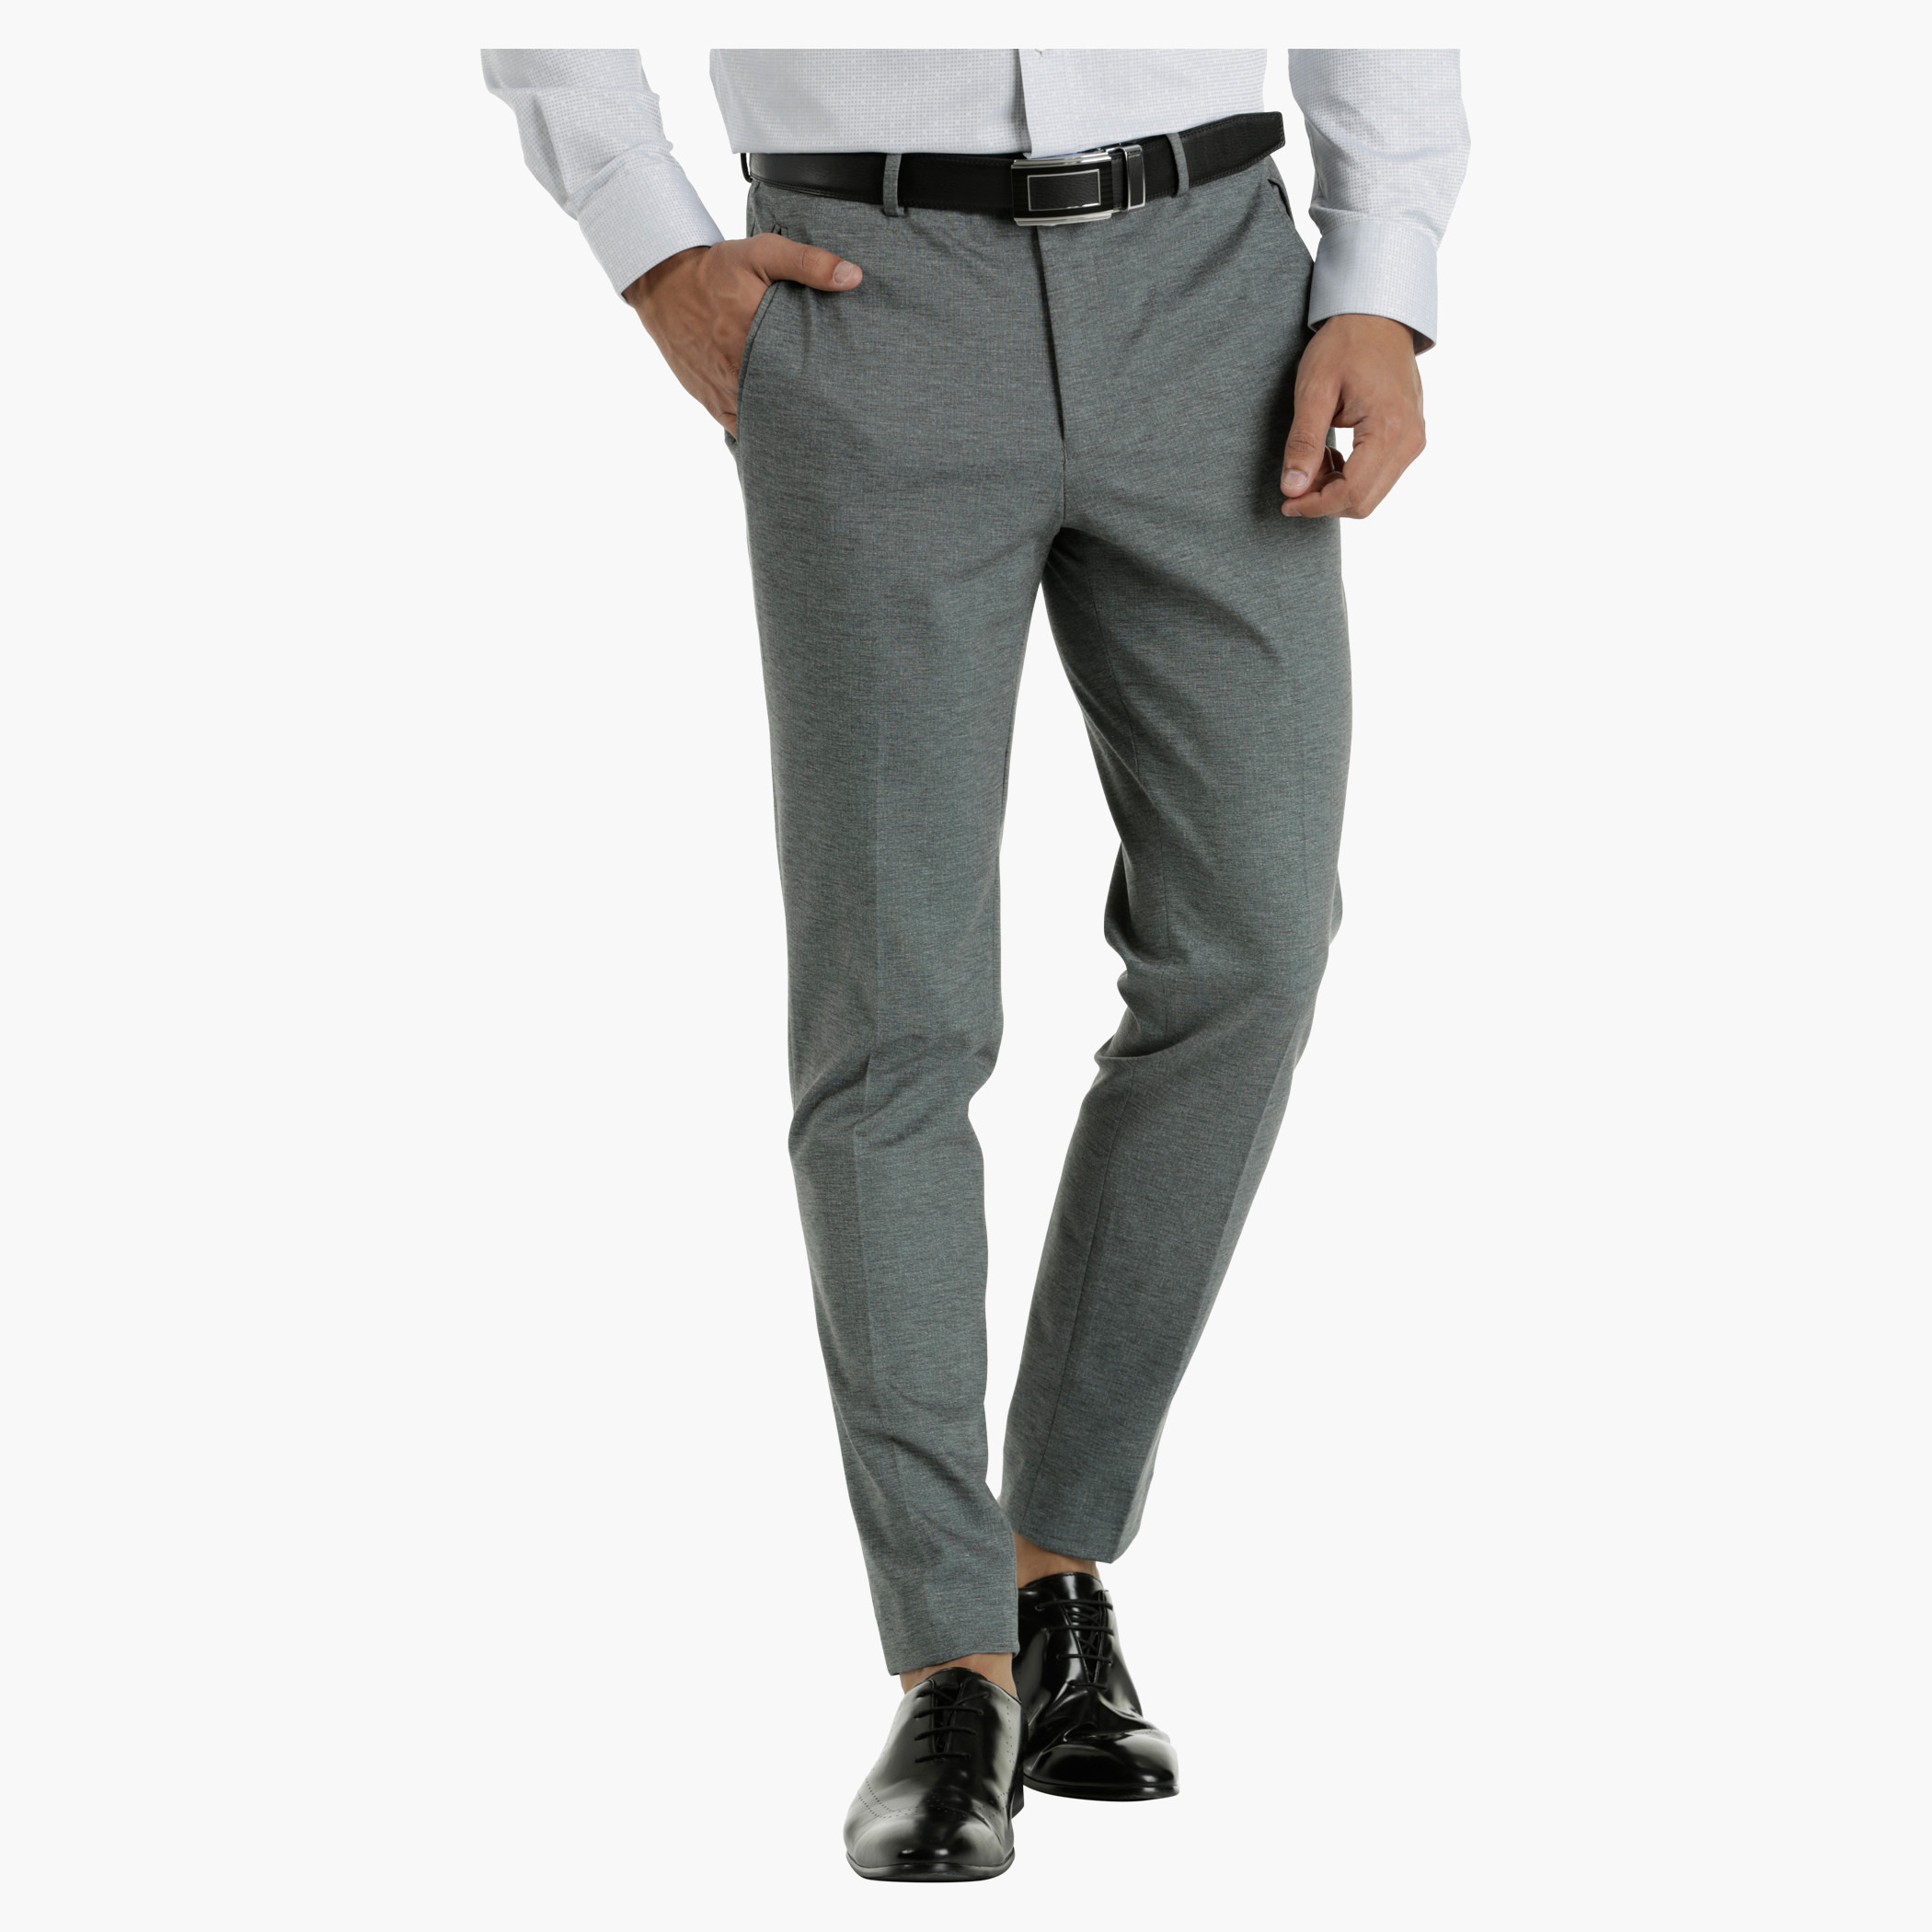 Hot Fashion Mens Slim Fit Business Formal Pants Cotton Zipper Plus Size  Casual Office Skinny Straight Solid Trousers From Gl8888, $12.32 |  DHgate.Com